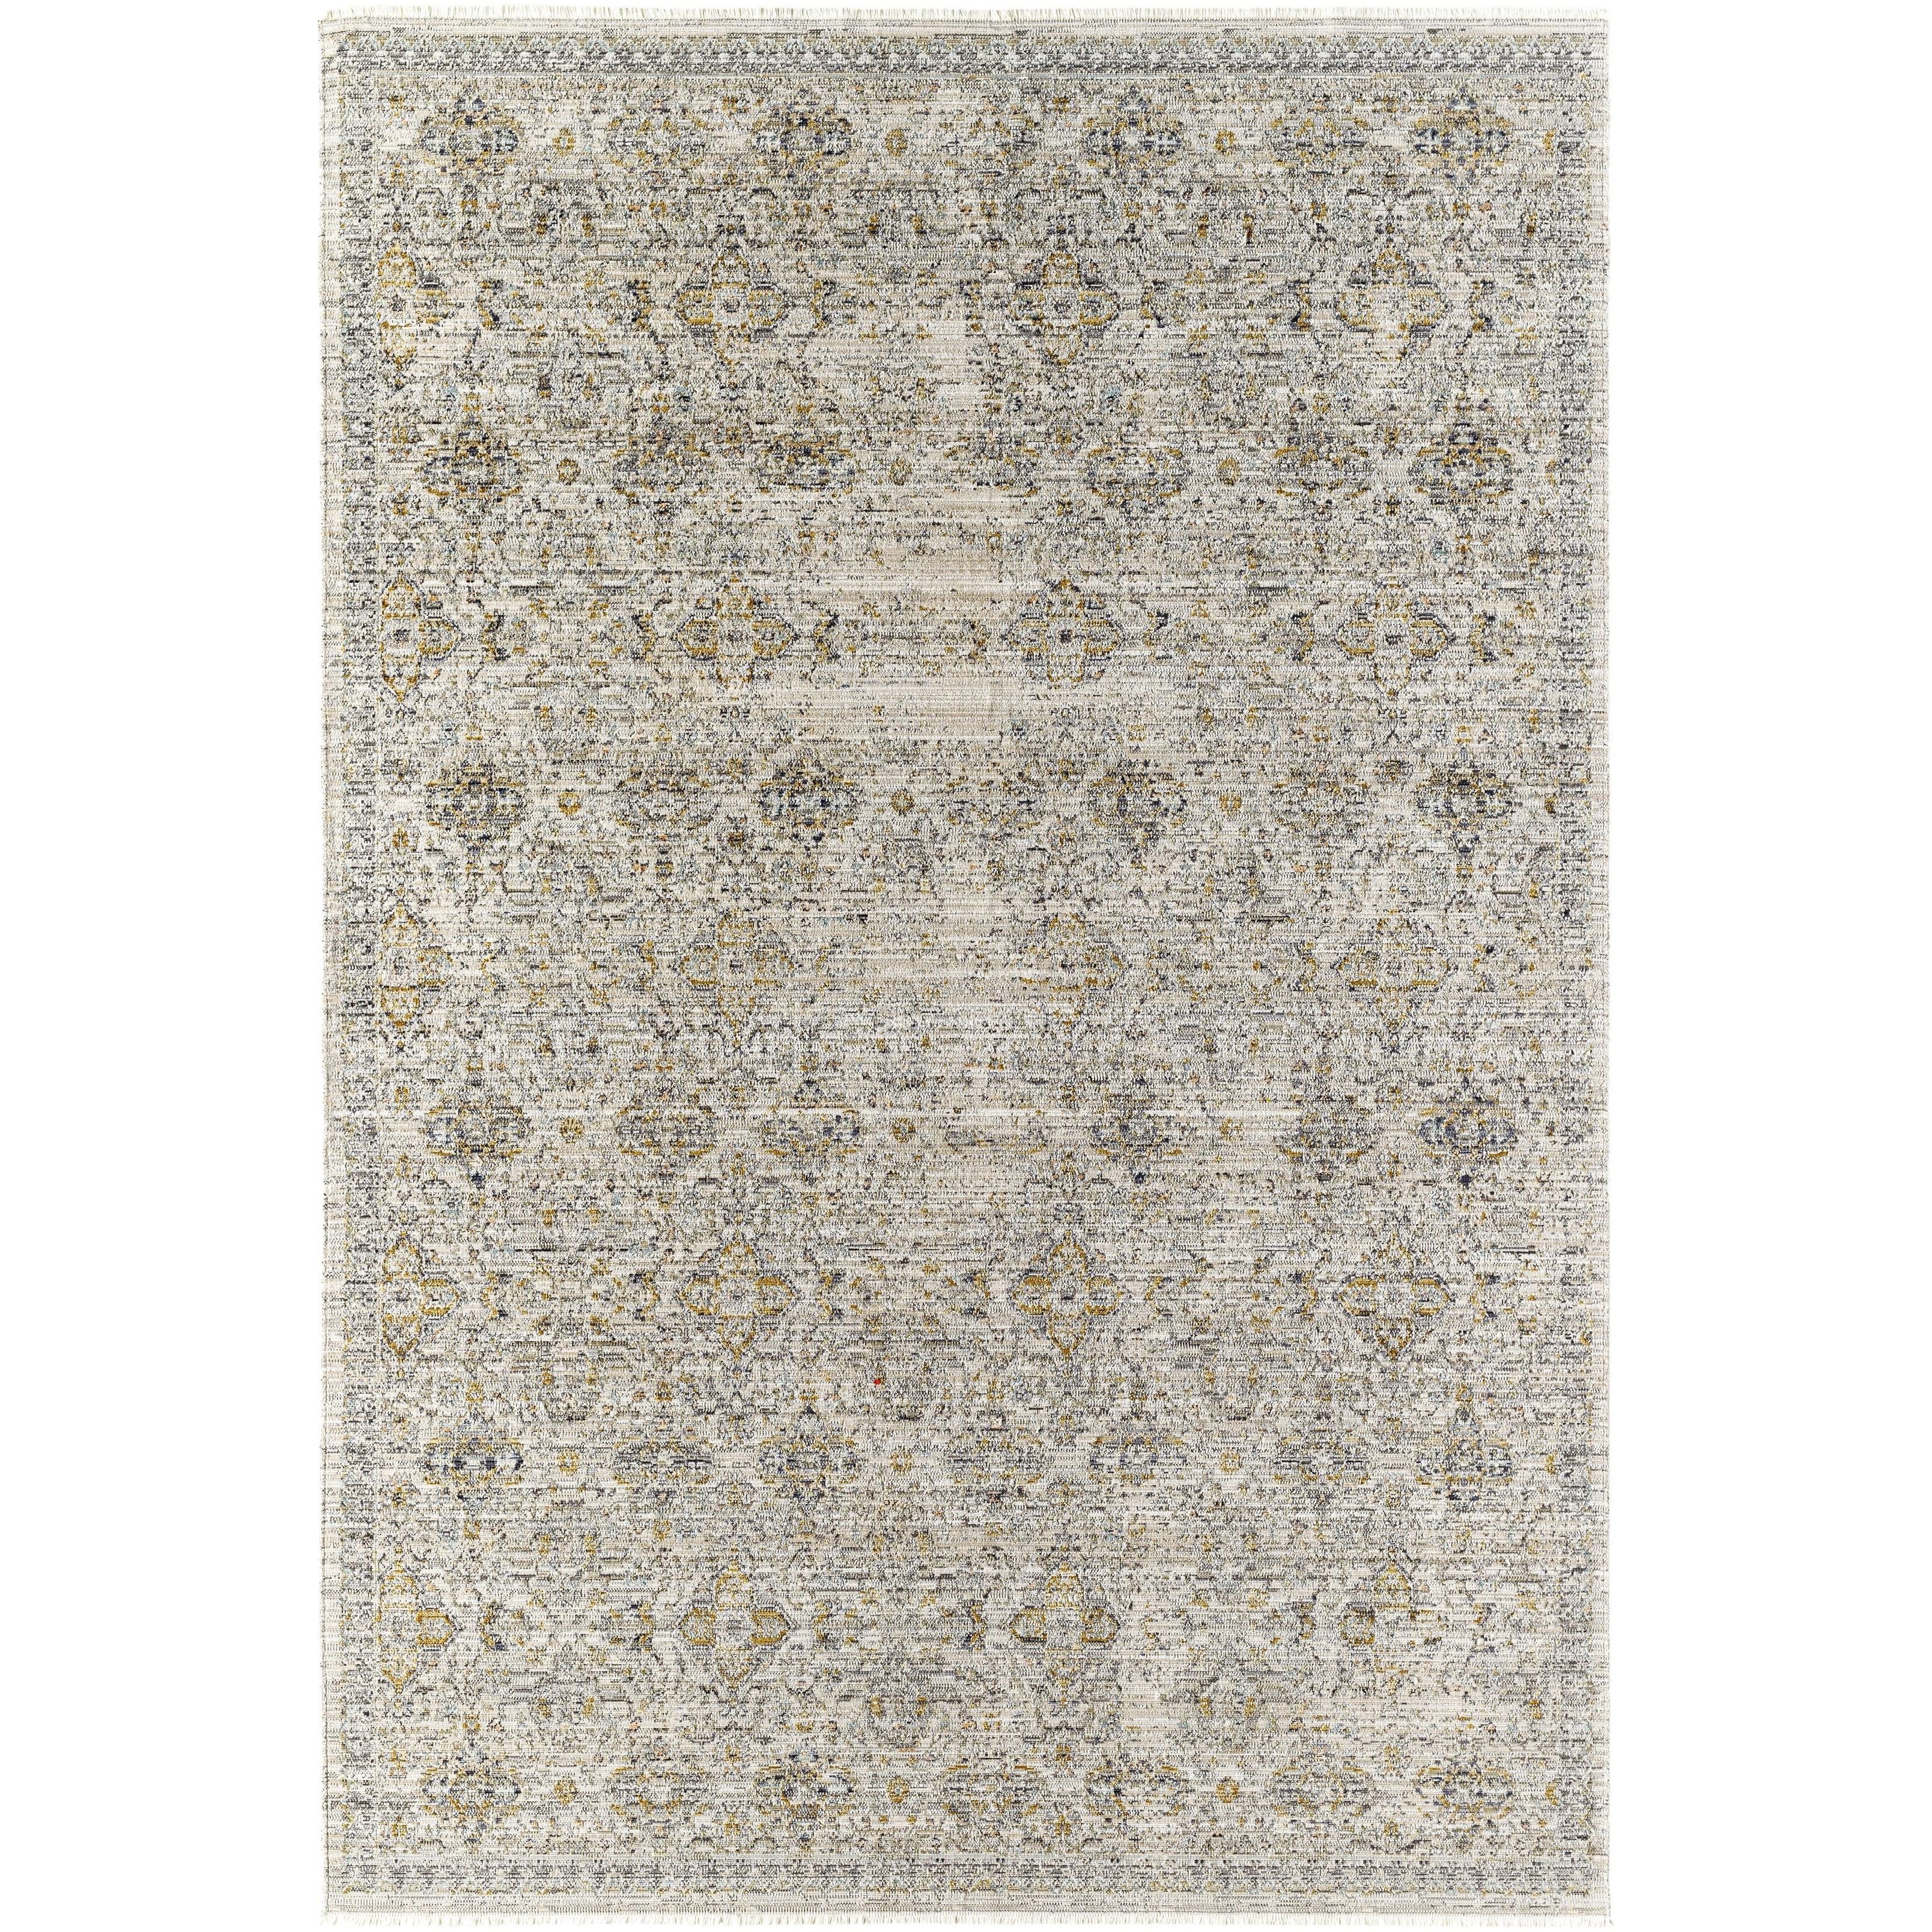 Introduce your home to the timeless beauty of the Margaret area rug! This special piece from our Becki Owens x Surya collaboration is the perfect way to add a vintage-inspired touch to any space. Amethyst Home provides interior design, new home construction design consulting, vintage area rugs, and lighting in the Los Angeles metro area.